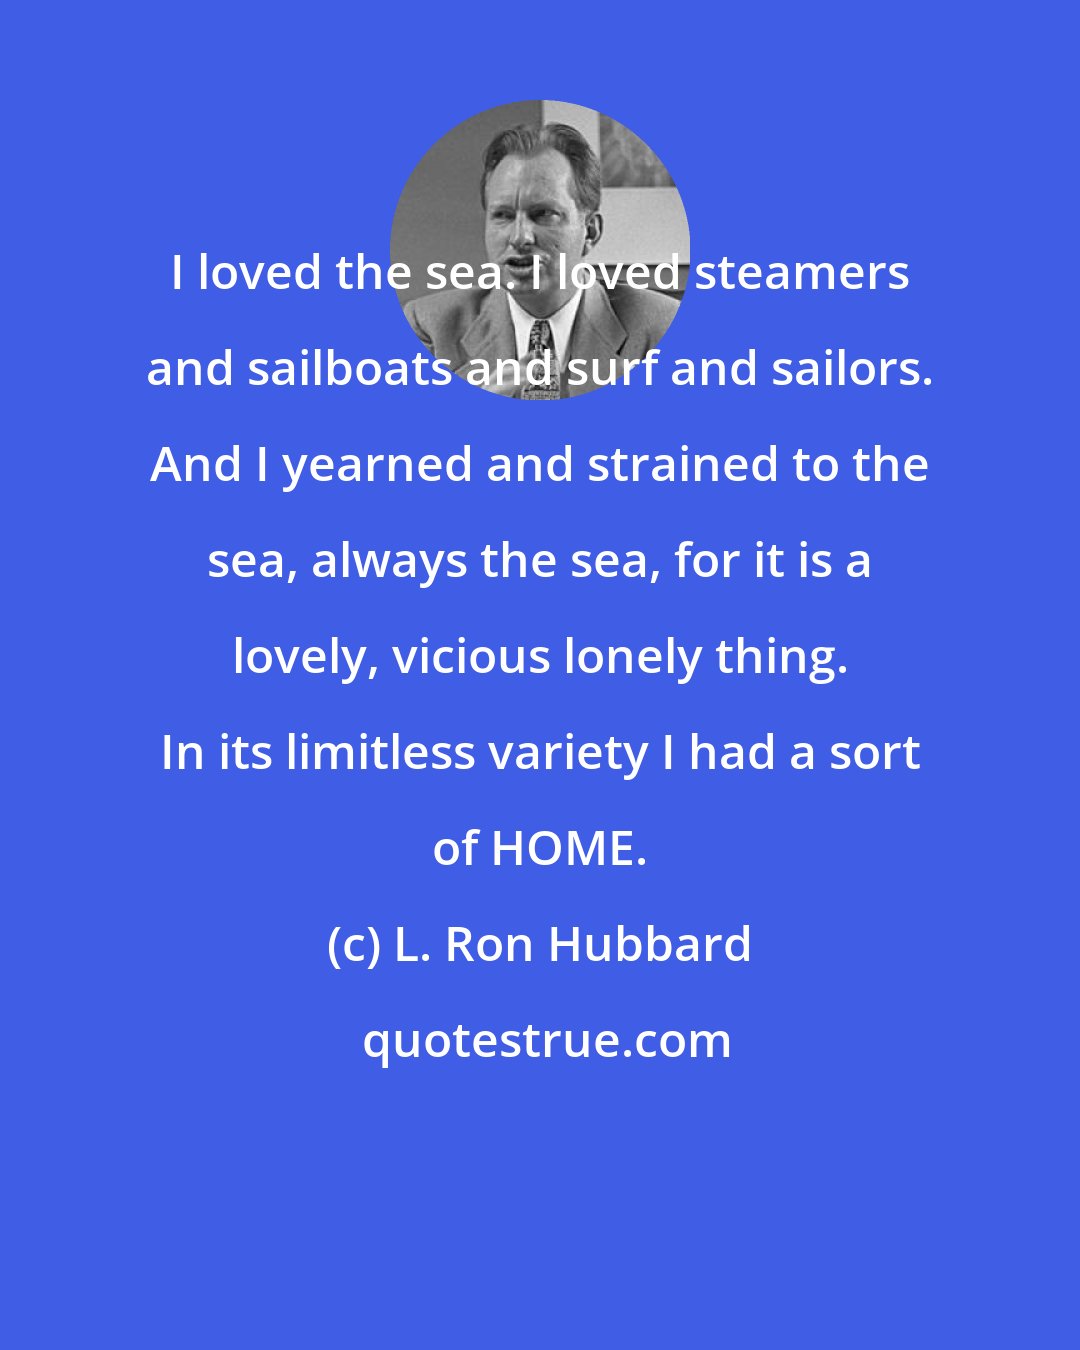 L. Ron Hubbard: I loved the sea. I loved steamers and sailboats and surf and sailors. And I yearned and strained to the sea, always the sea, for it is a lovely, vicious lonely thing. In its limitless variety I had a sort of HOME.